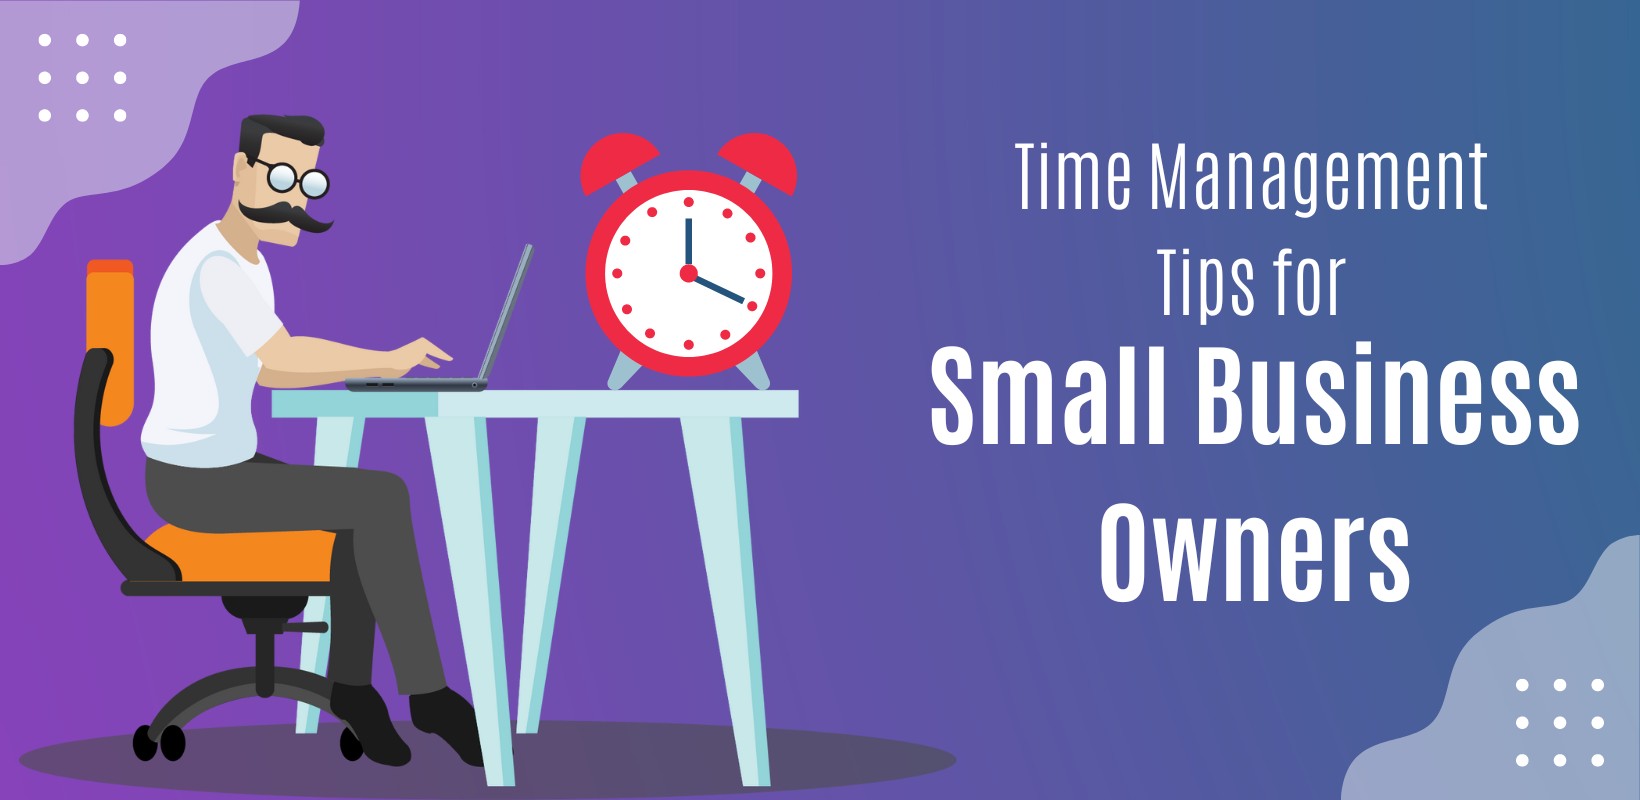 Time Management Tips for Small Business Owners Banner Image